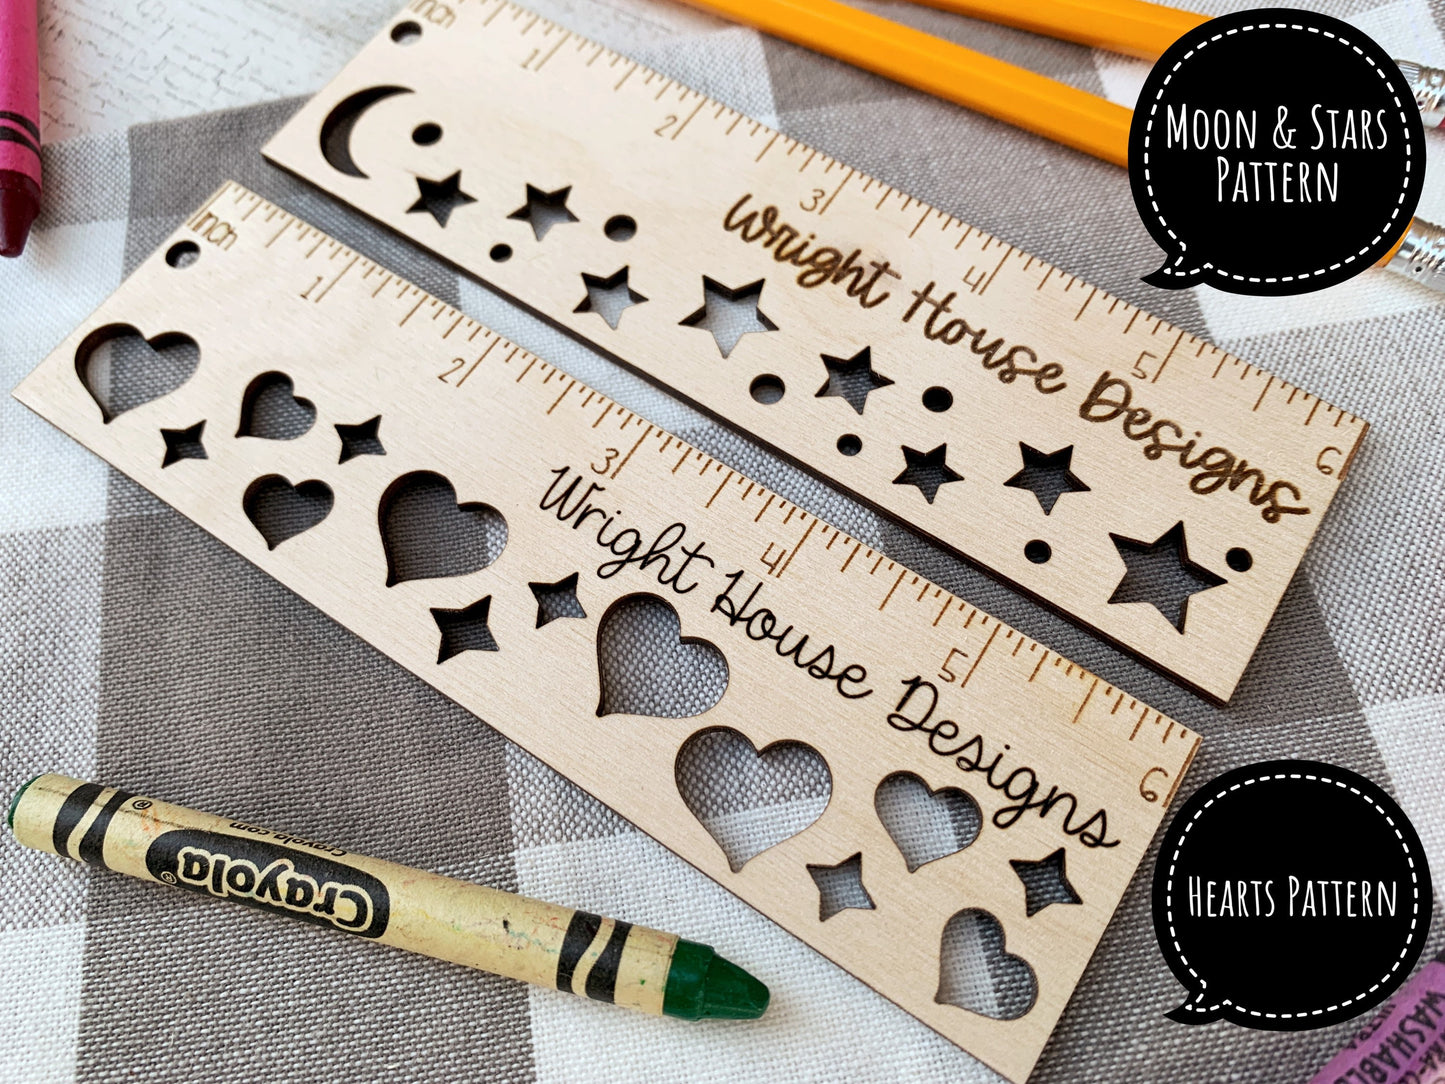 Wooden Laser Engraved Ruler - Fun Decorative Pattern - Personalized School and Office Supplies - Custom Monogram Ruler For Kids and Teachers